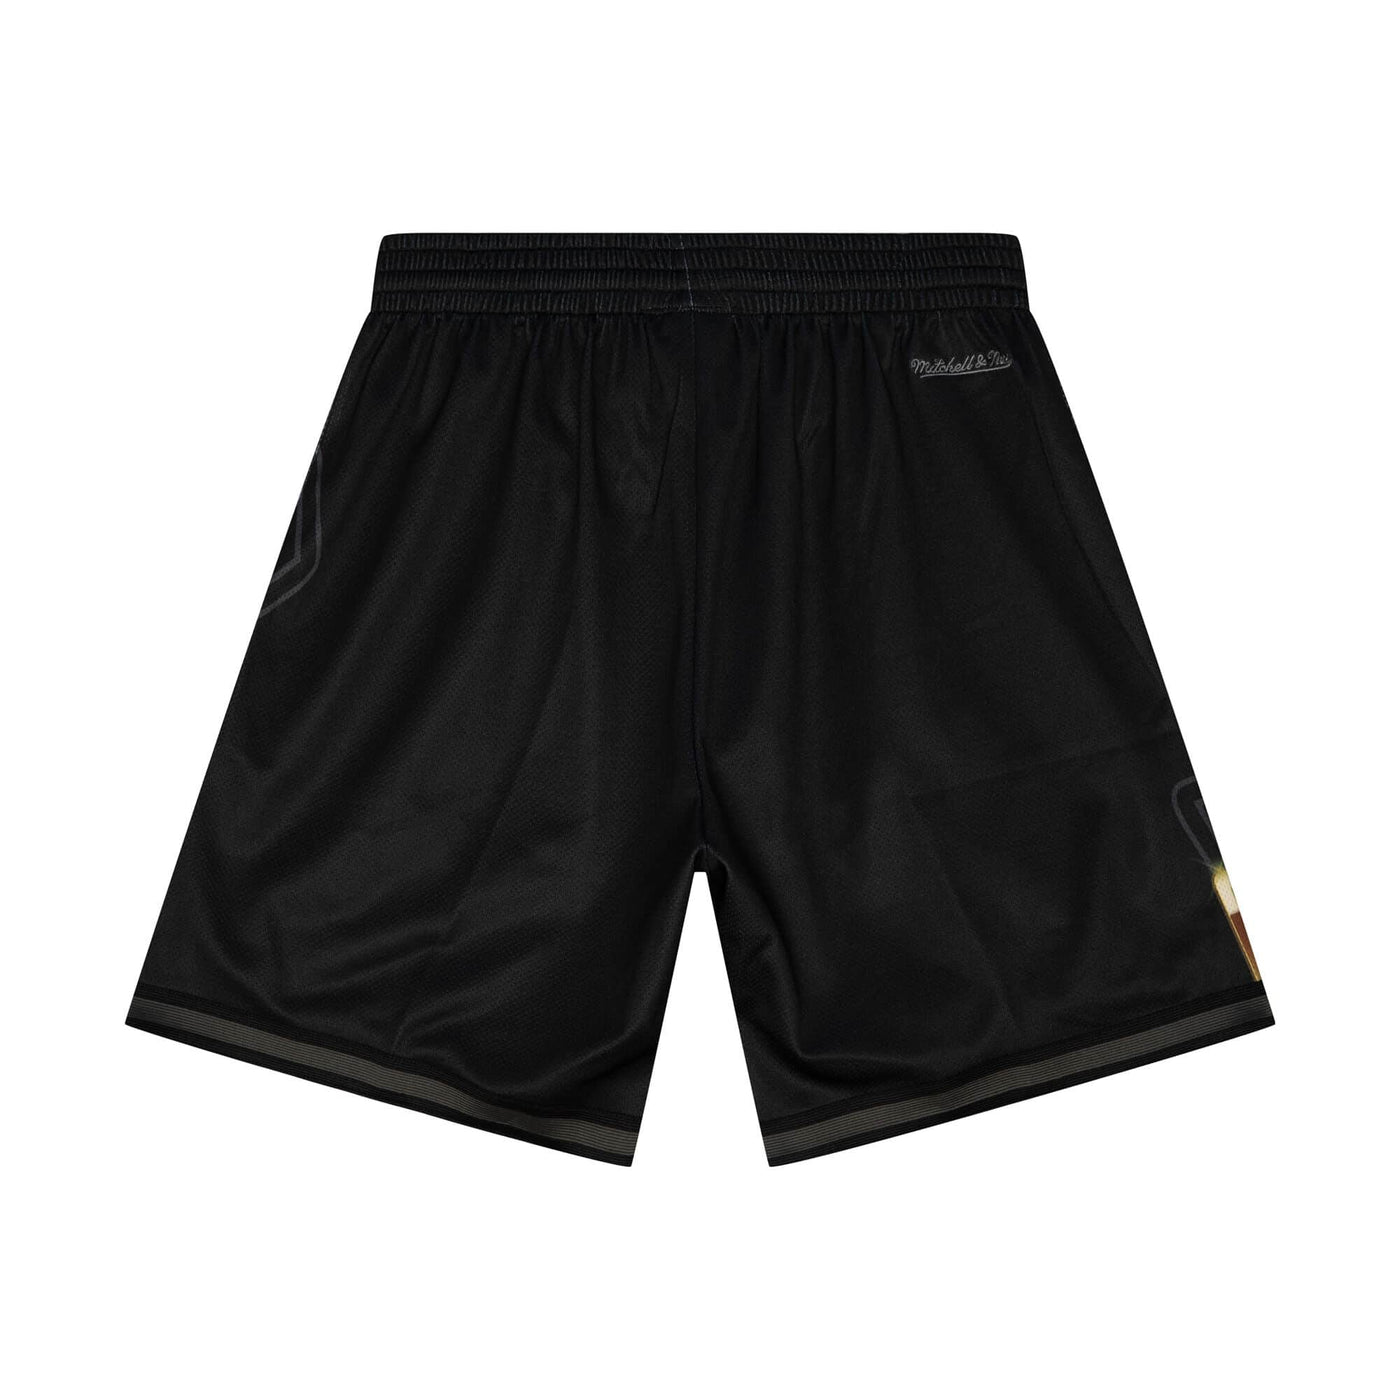 Mitchell & Ness Big Face 4.0 Fashion Shorts Los Angeles Lakers Black Gold Back